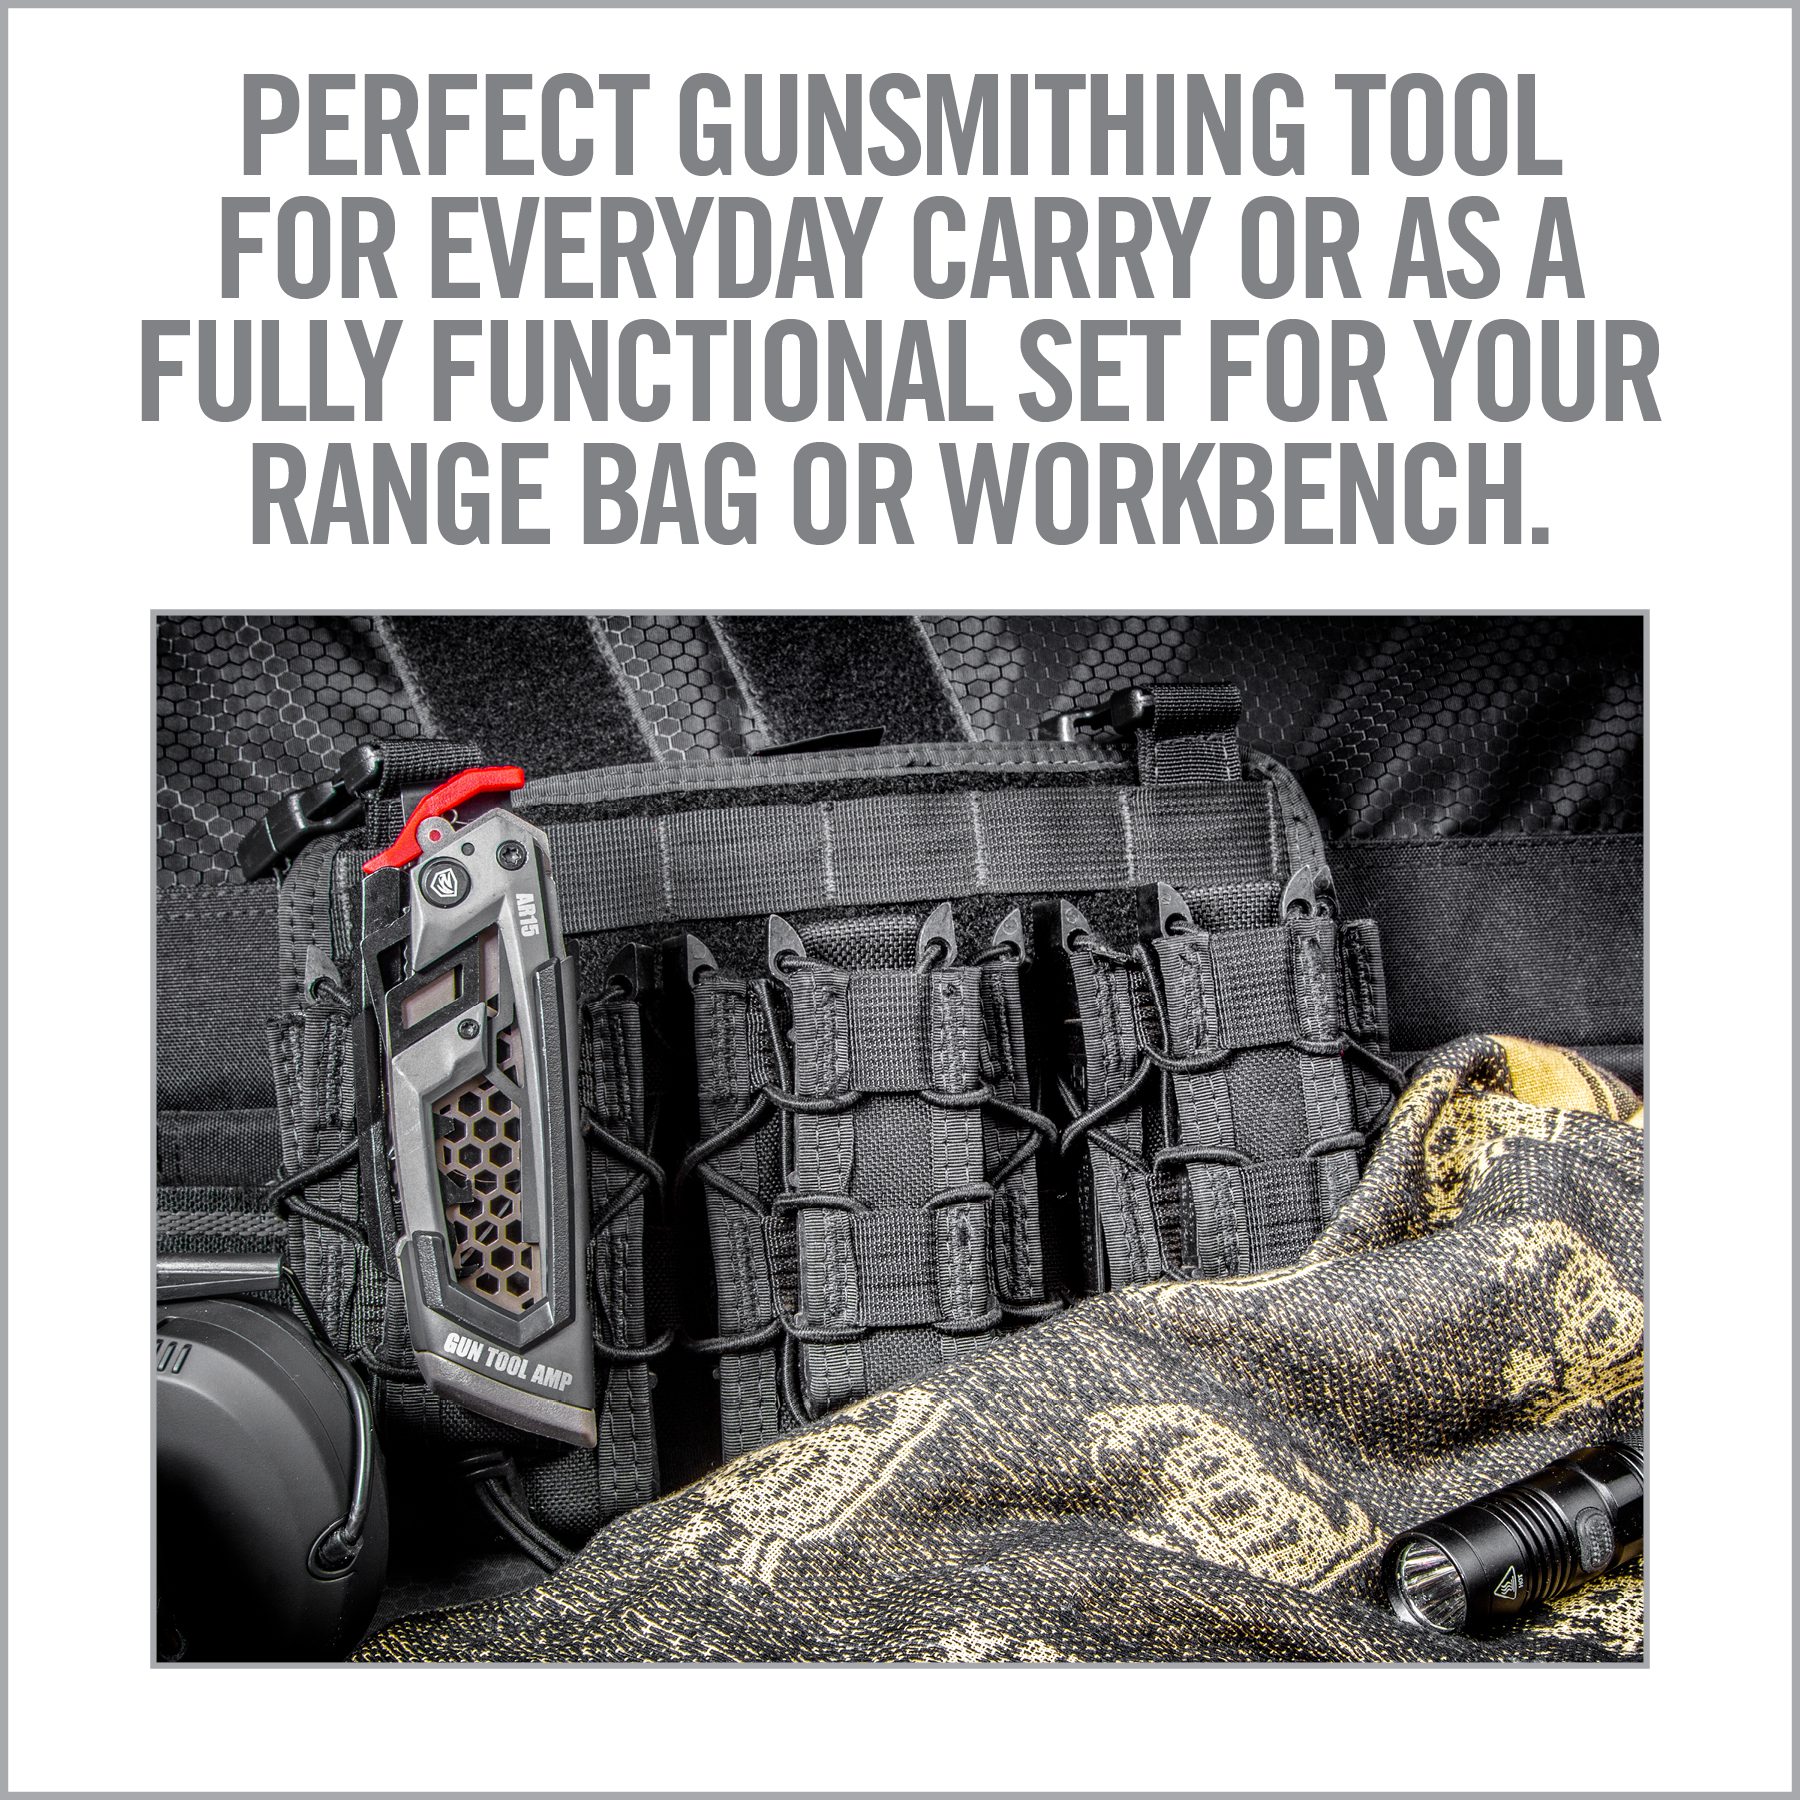 an advertisement for the ultimate gun cleaning tool